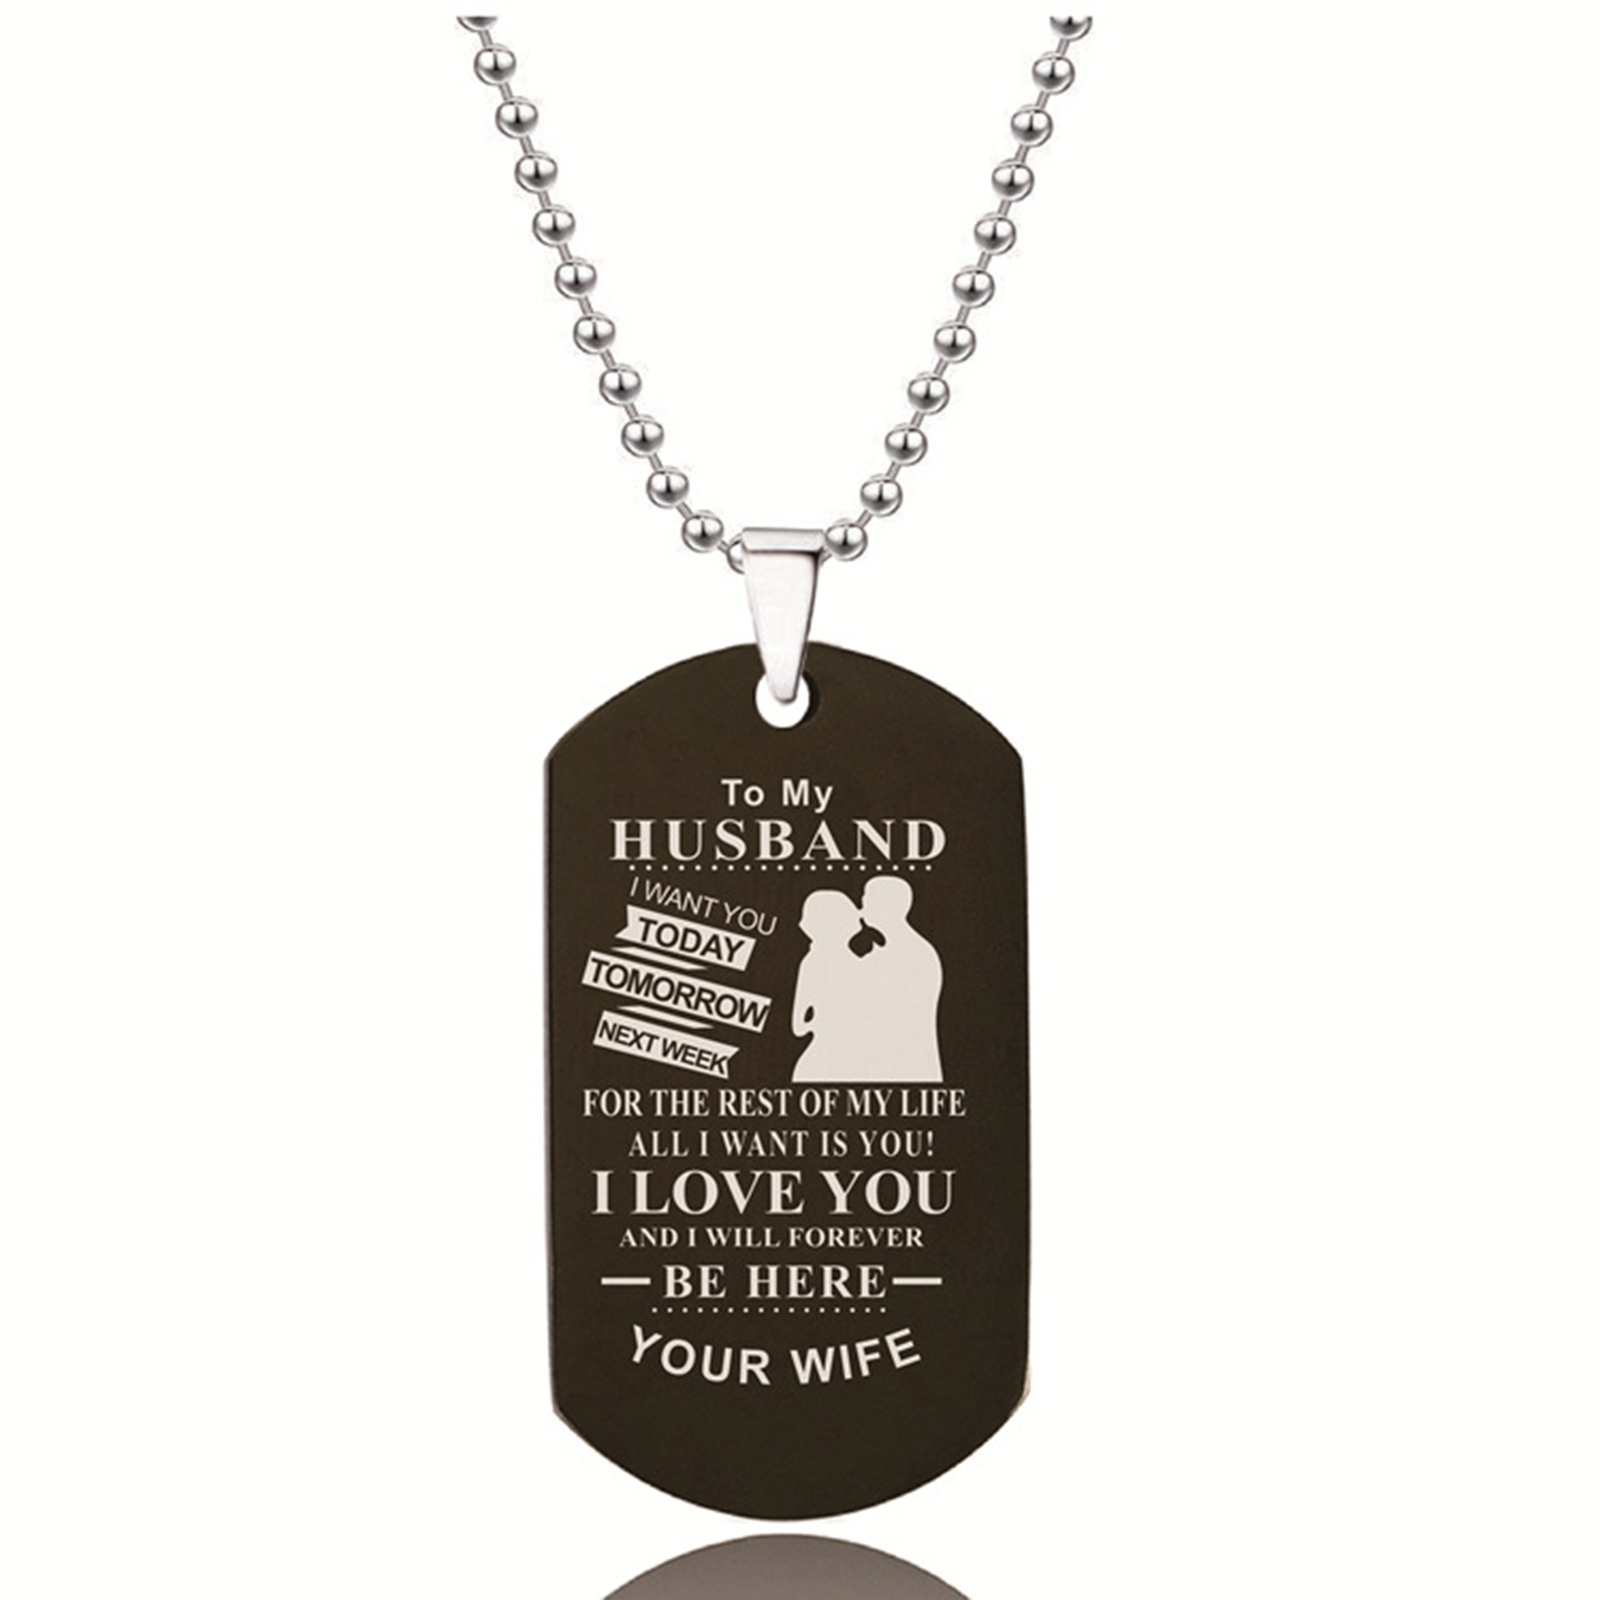 Picture of Stainless Steel Ball Chain Findings Necklace Black Envelope Message " TO MY HUSBAND " 60cm(23 5/8") long, 1 Piece